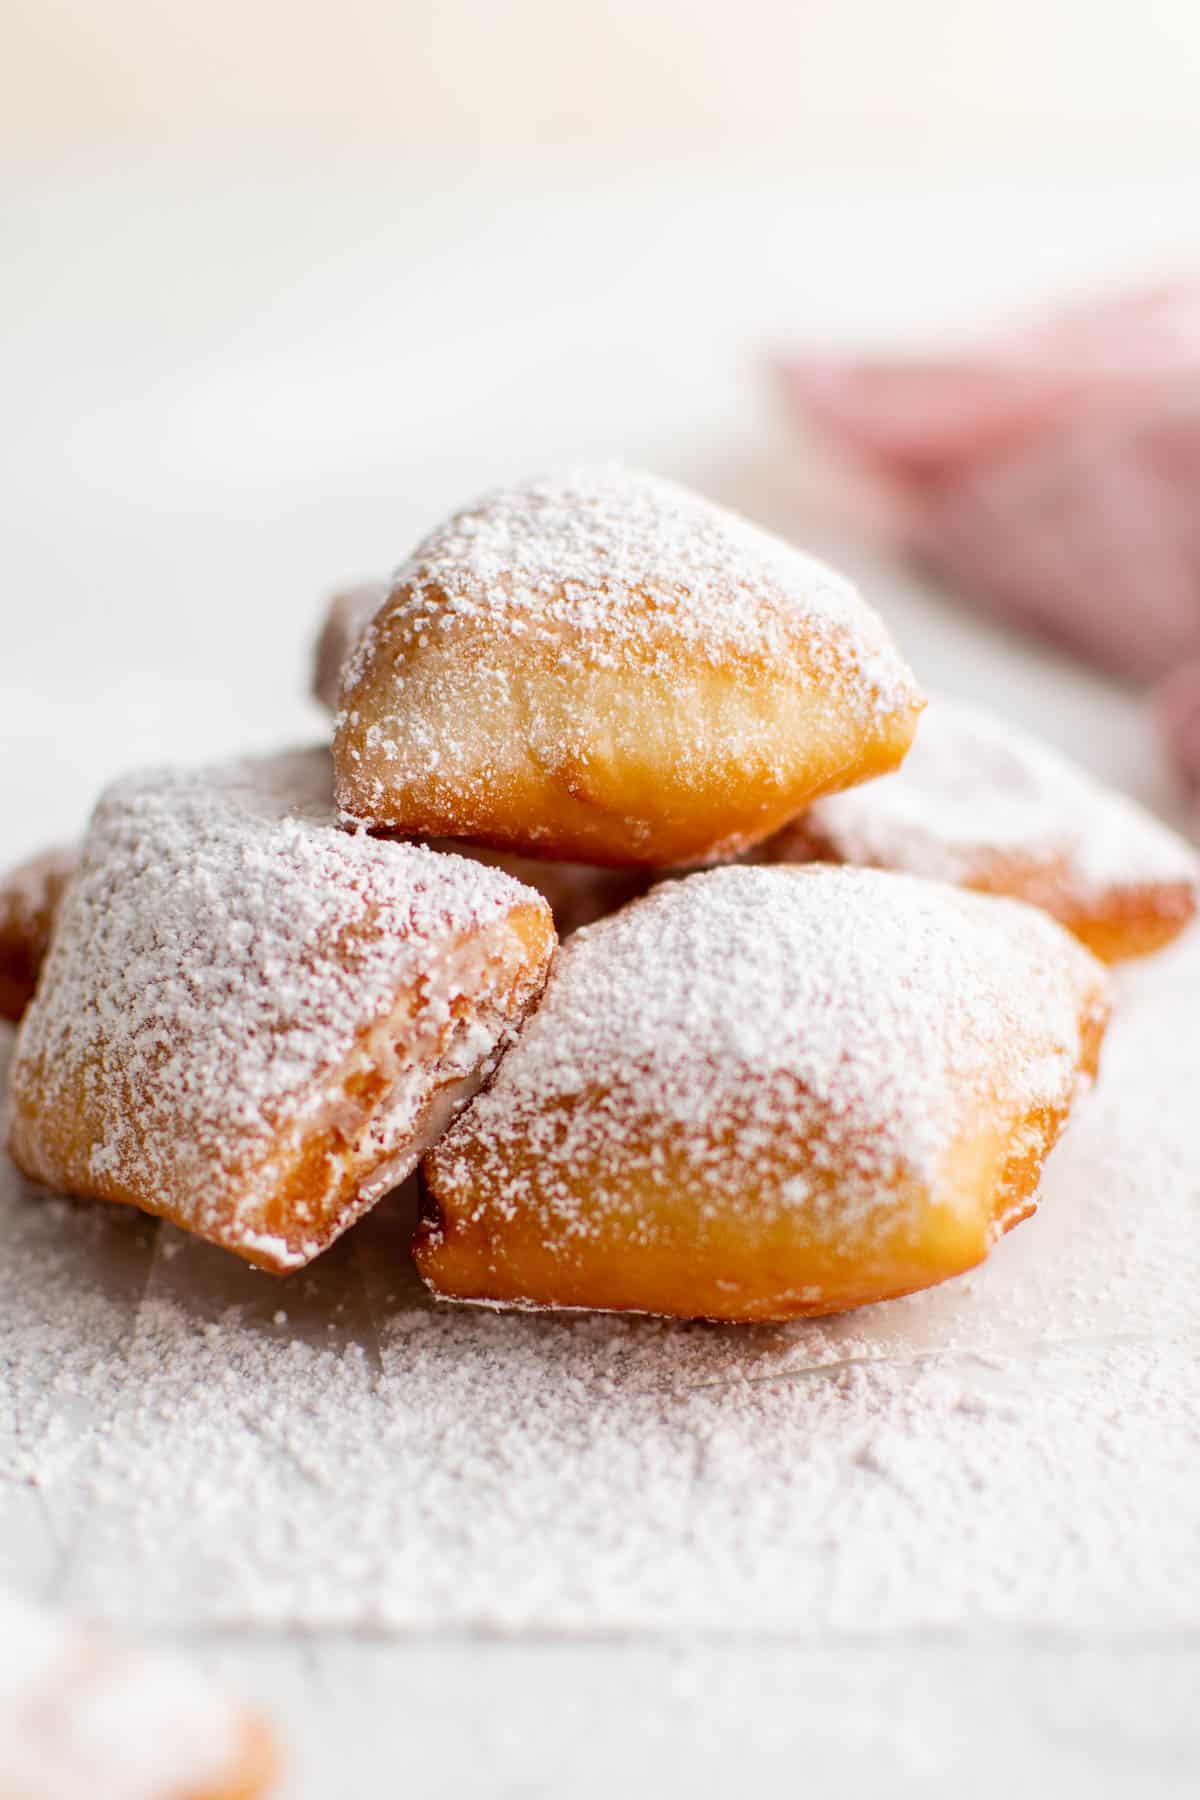 A pile of beignets dusted with powdered sugar sitting on a white countertop.